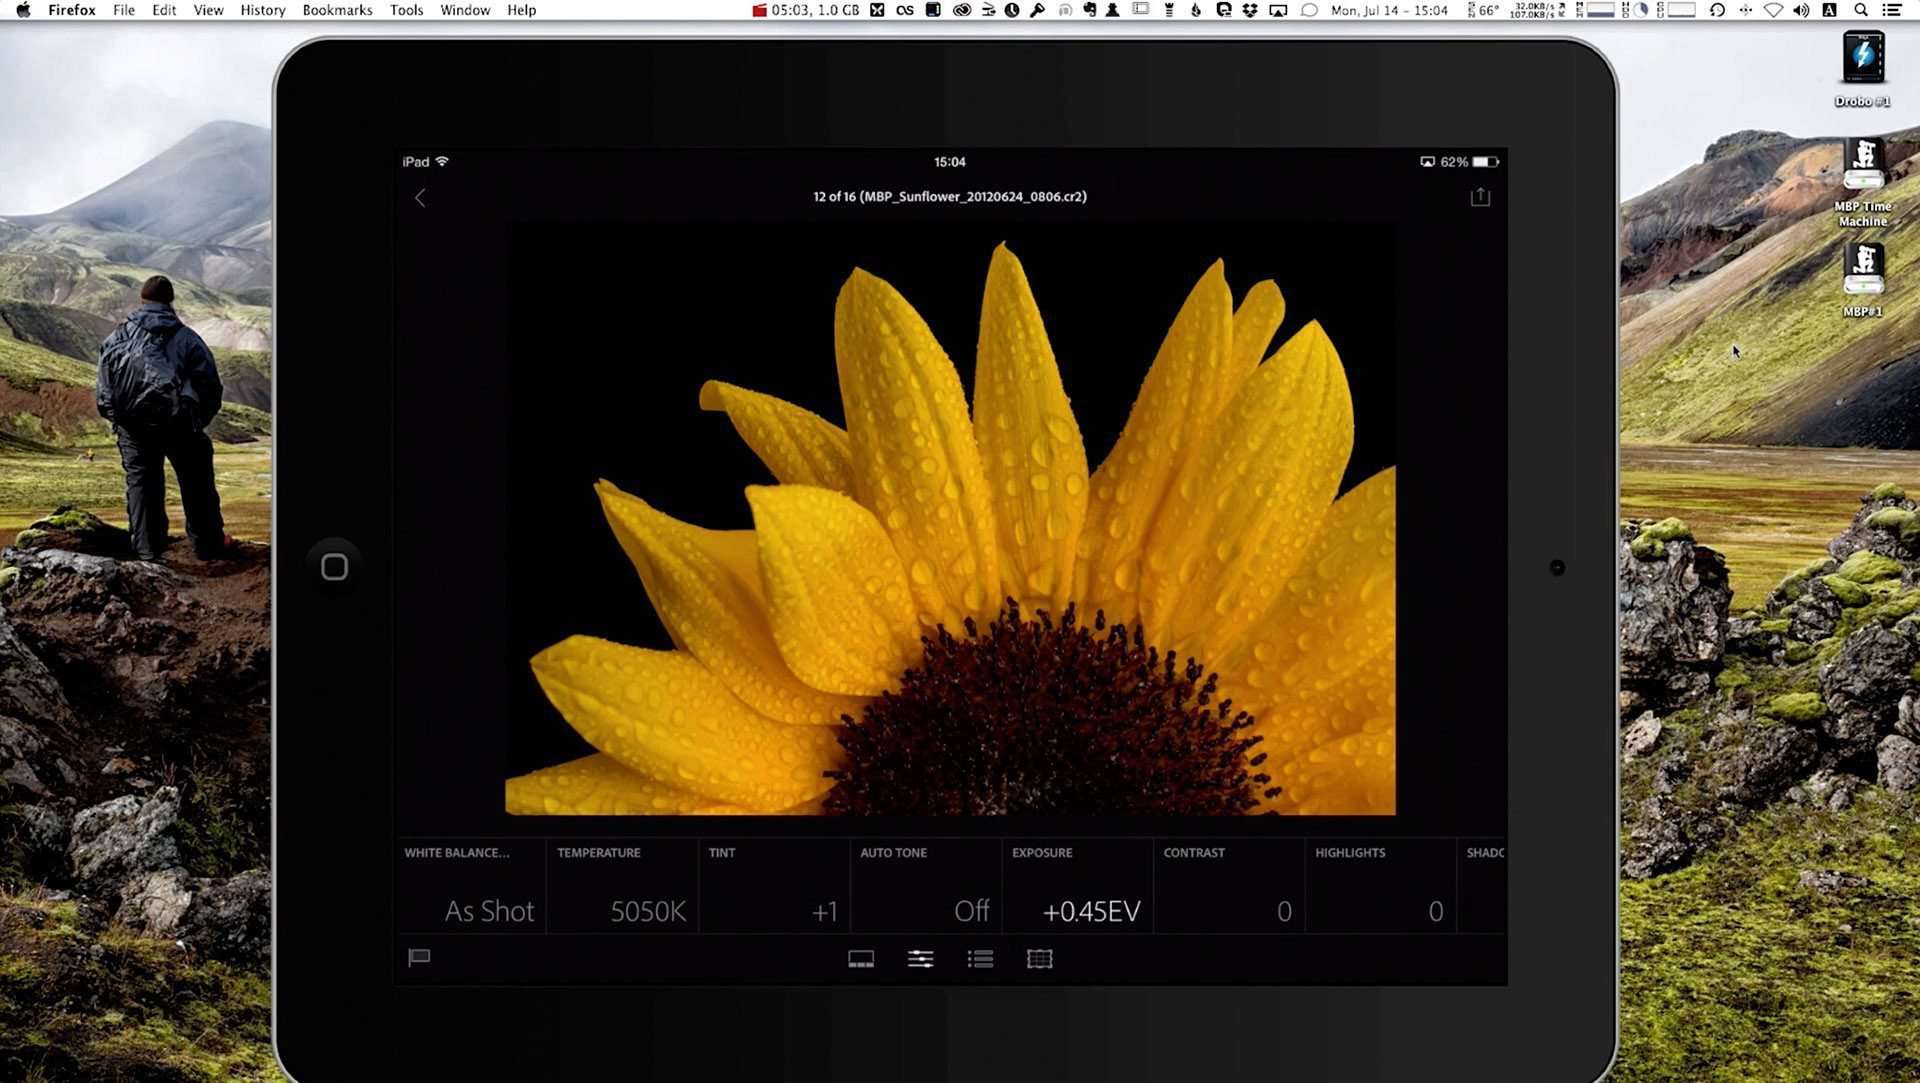 Editing Images in Lightroom Mobile